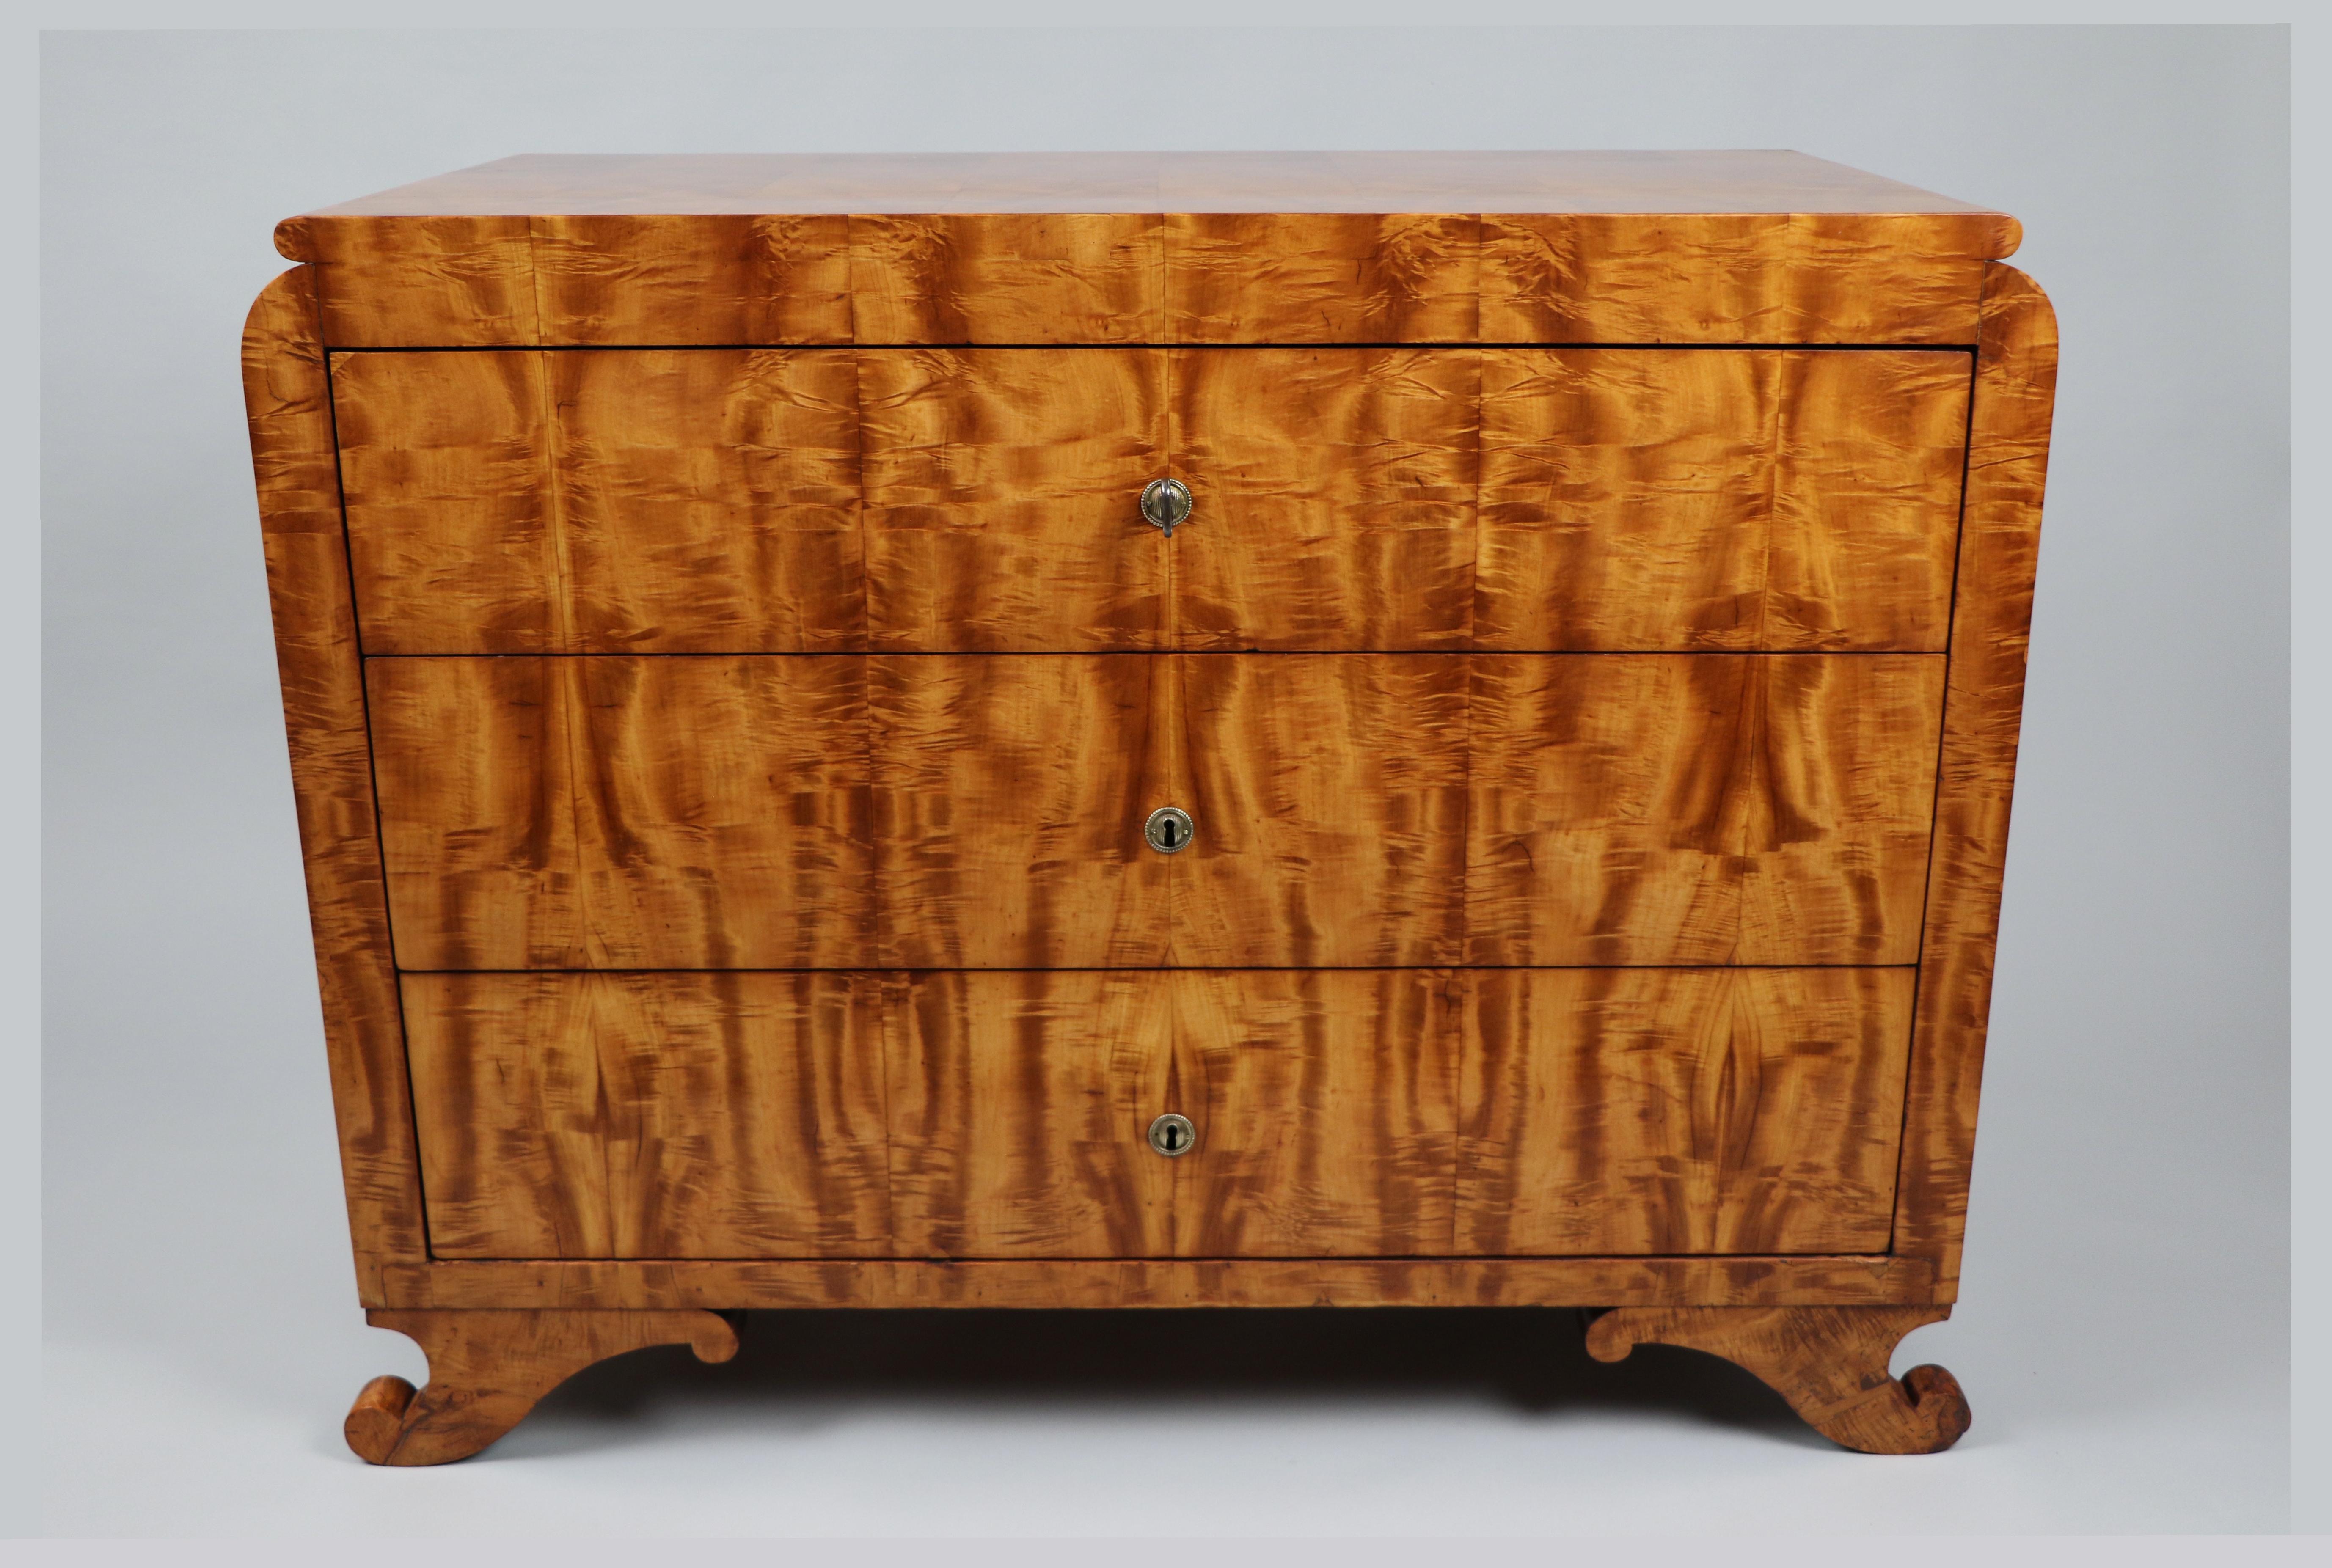 We would like to offer you this truly exquisite, early Biedermeier walnut chest of three drawers. The piece was made in Vienna circa 1825.

Viennese Biedermeier is distinguished by their sophisticated proportions, rare and refined design and